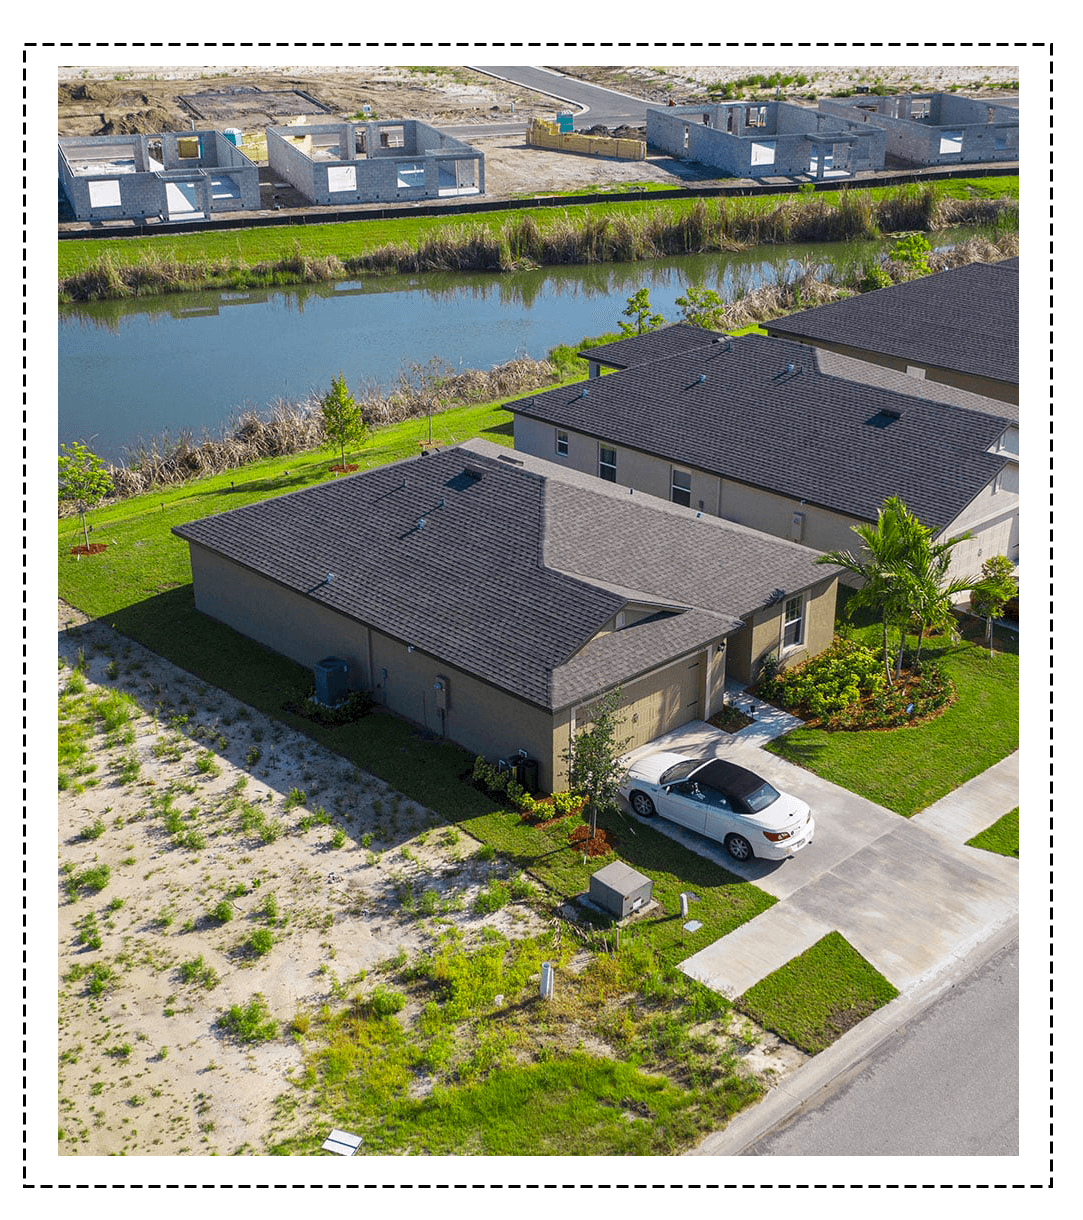 aerial view of a housing development in Florida with some houses under construction